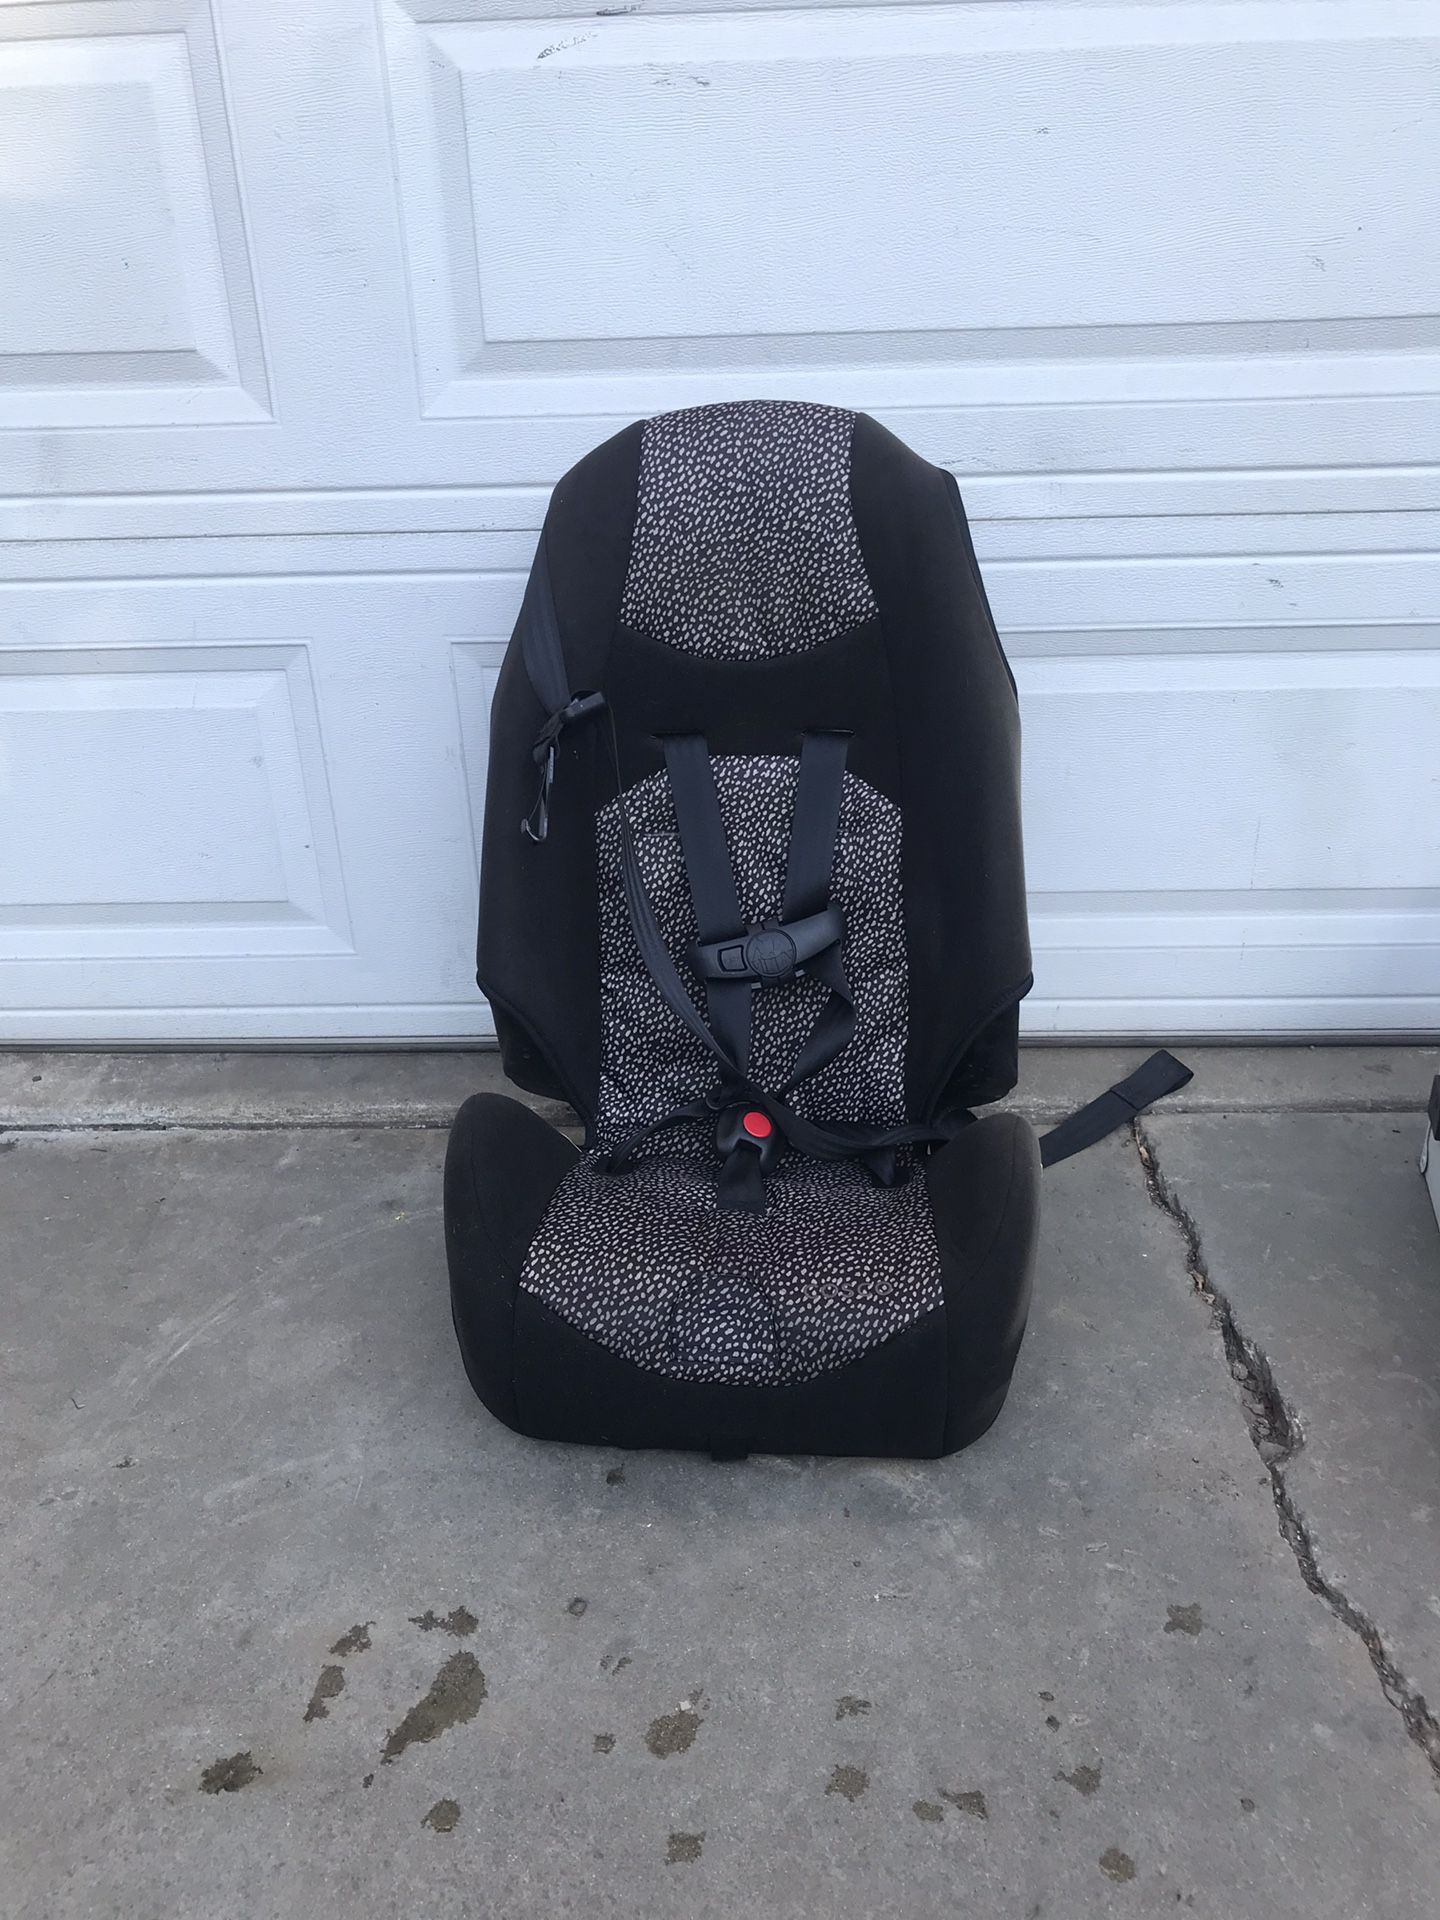 Car seat look at all the pictures